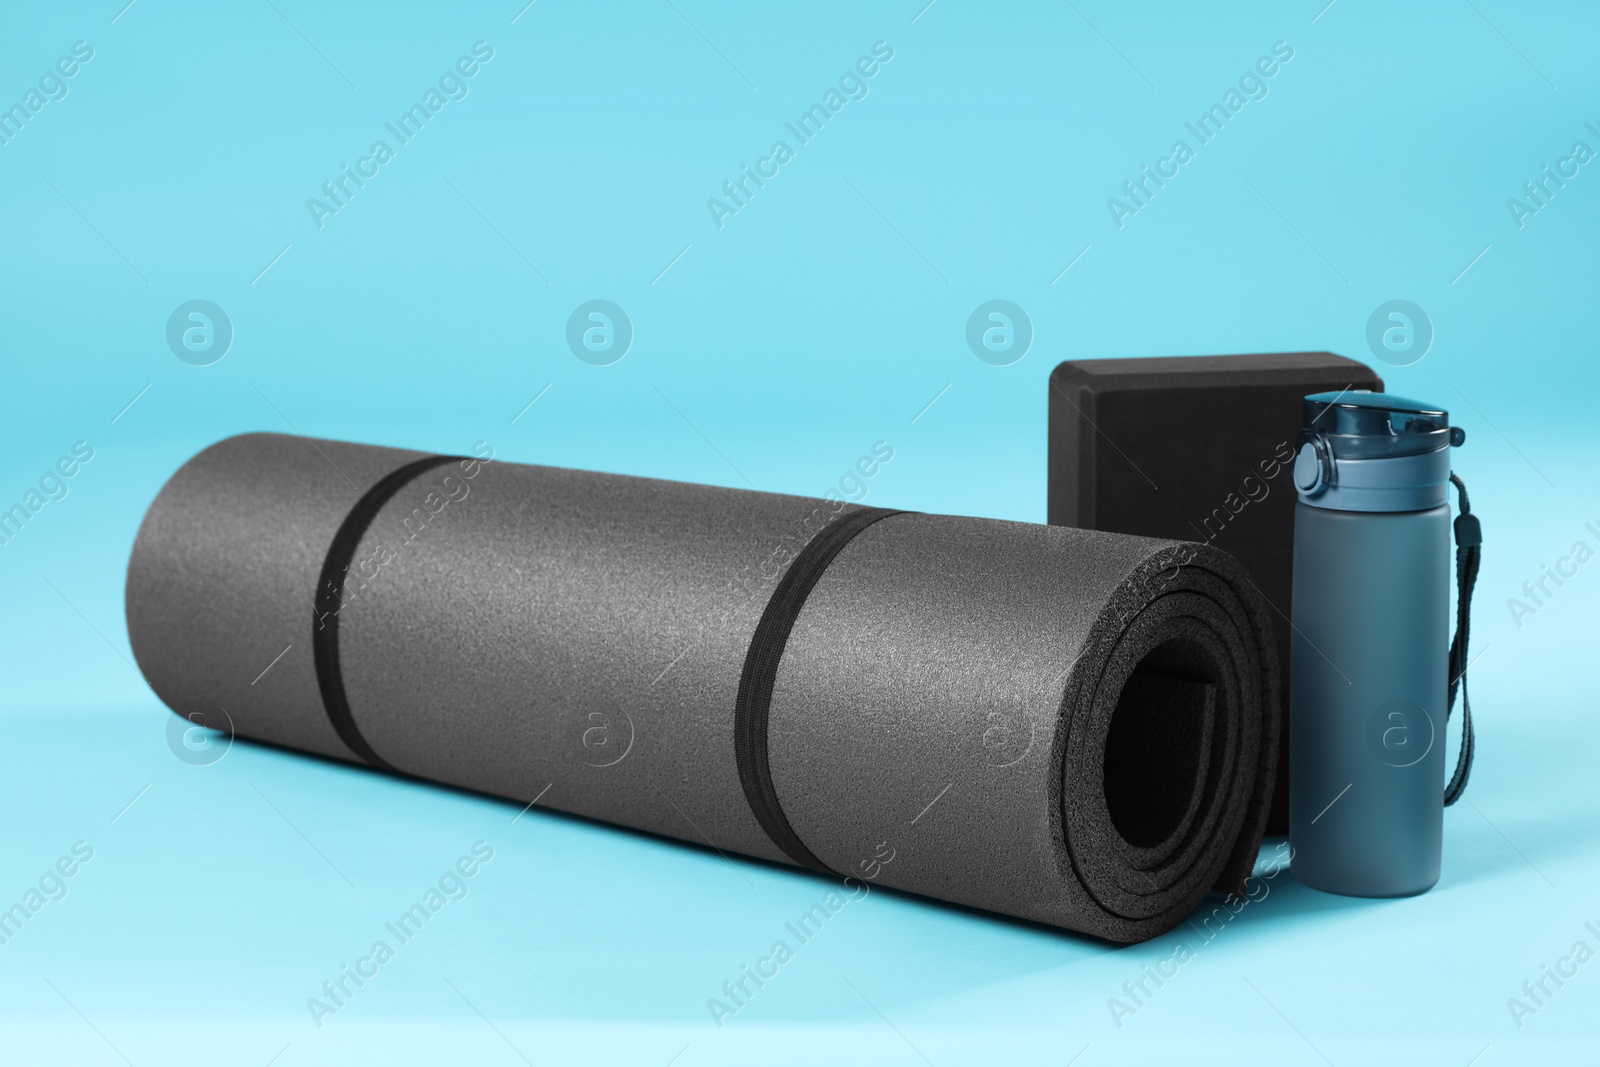 Photo of Exercise mat, yoga block and bottle of water on light blue background